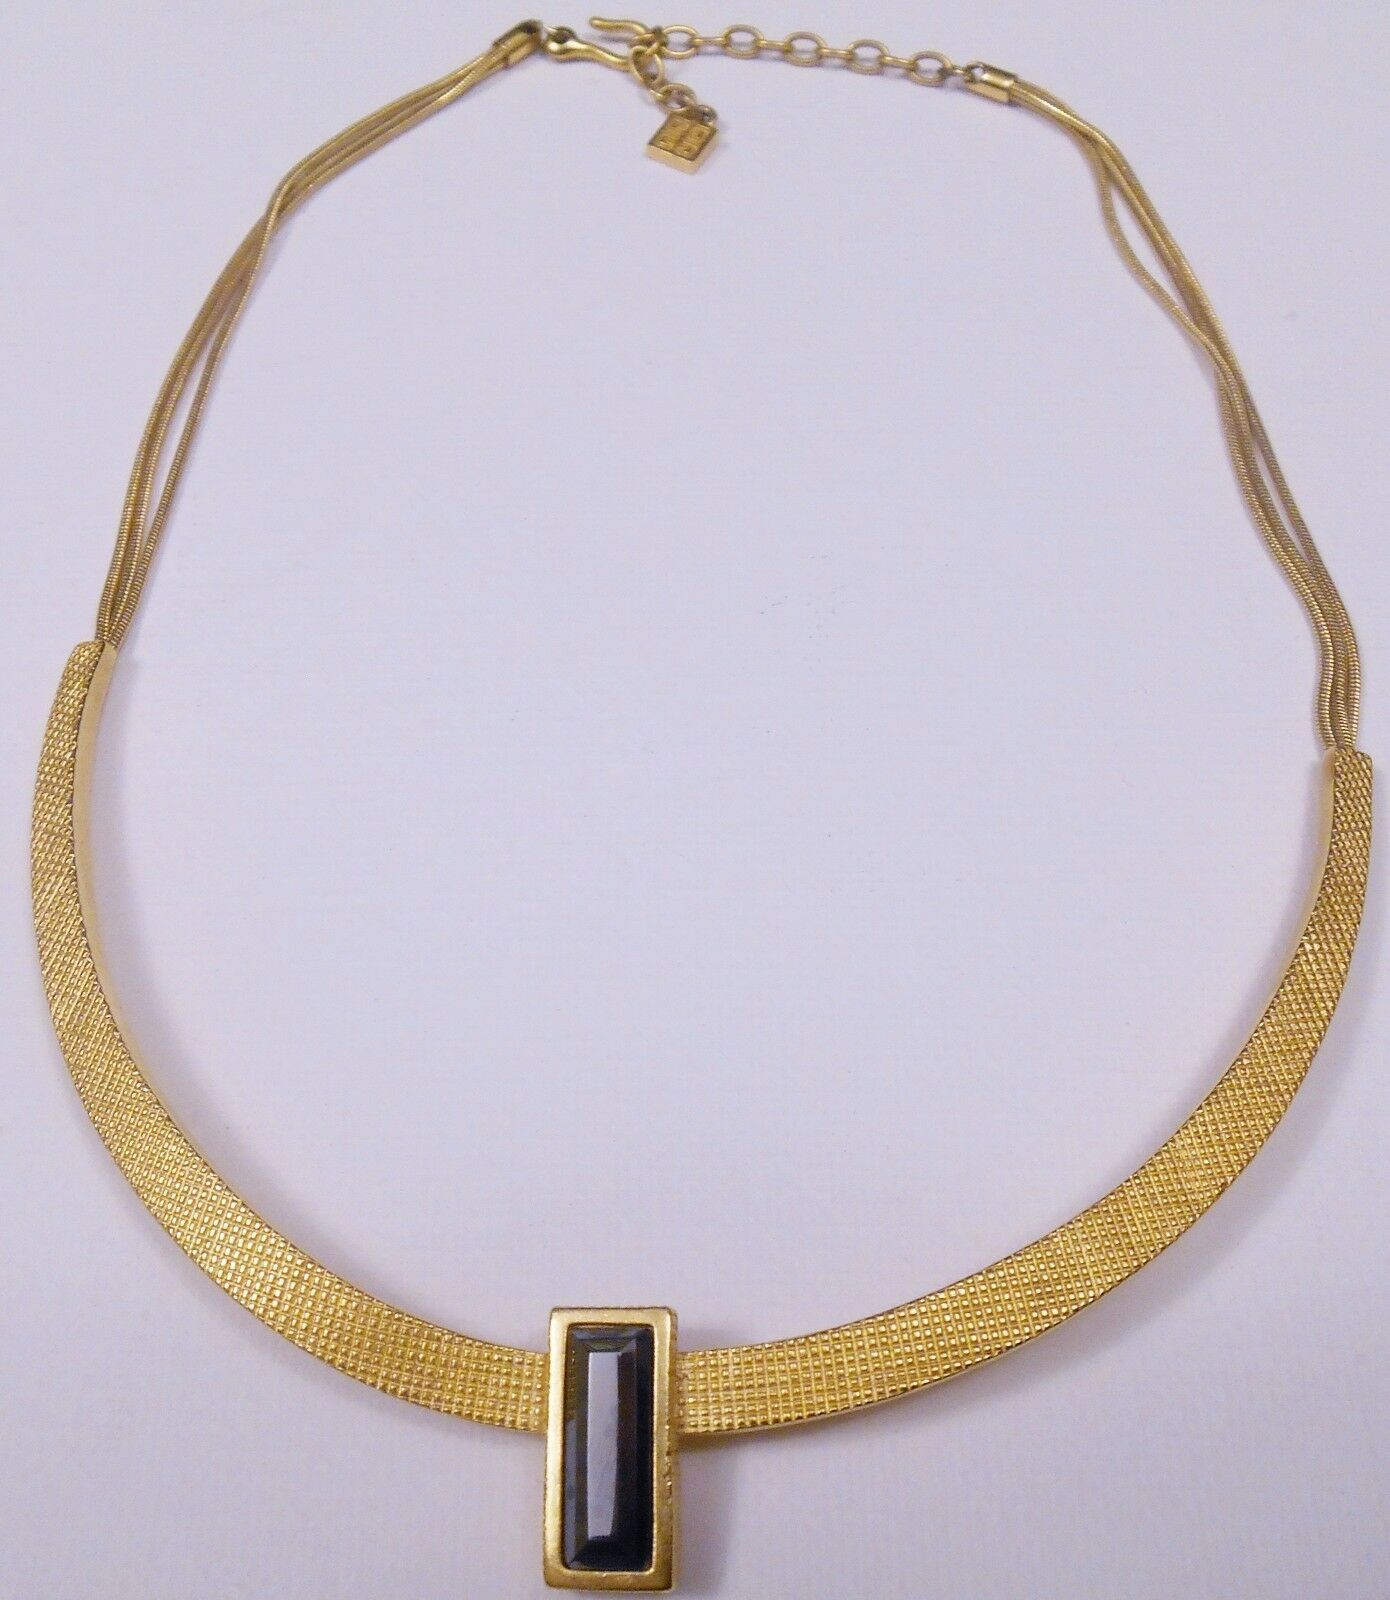 GIVENCHY Gold Tone Textured Choker NECKLACE Hematite Baguette Stone 17" - $99.95